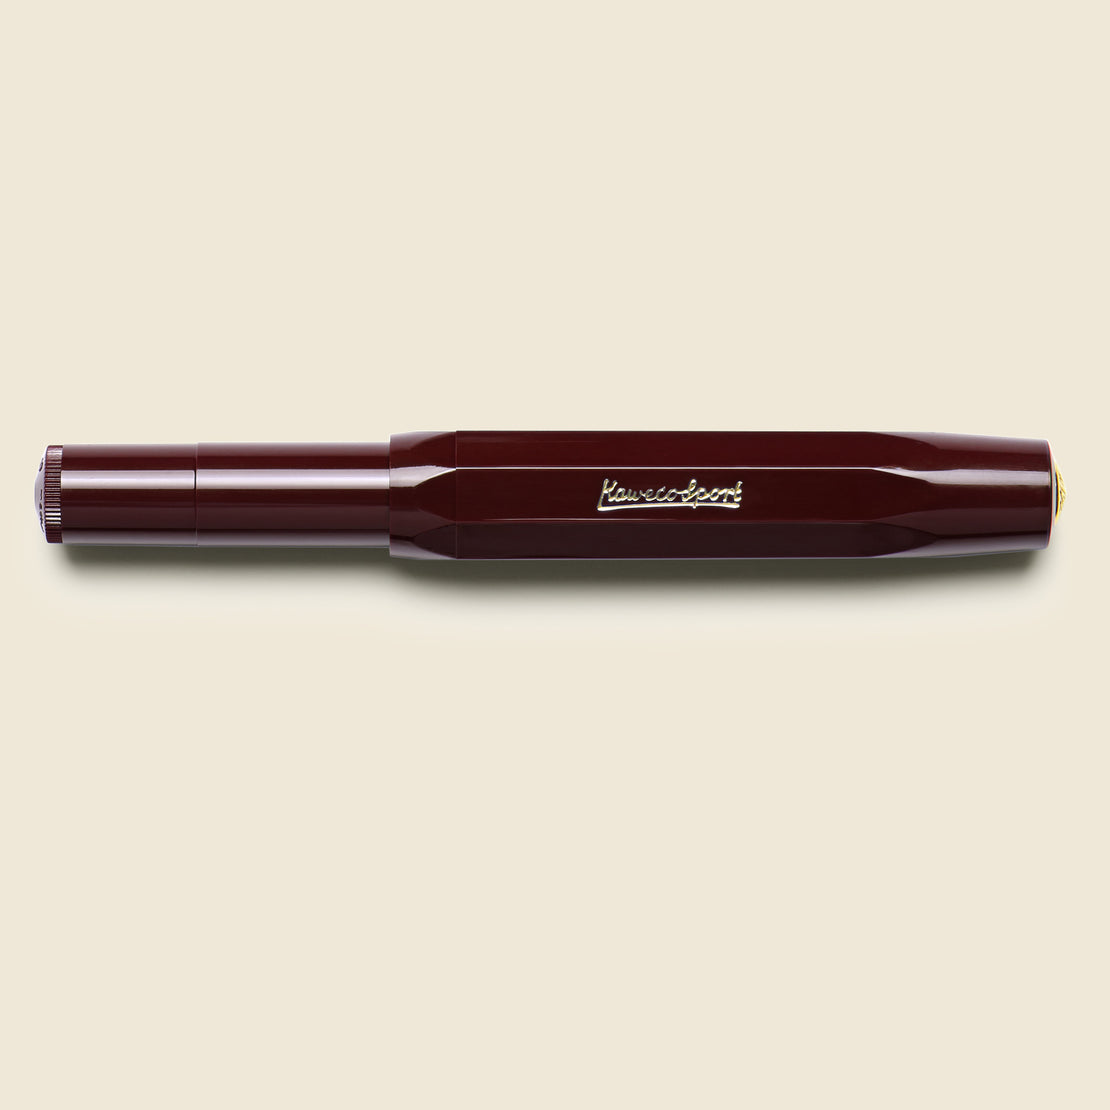 Bordeaux Classic Sport Gel Roller Pen - Kaweco - STAG Provisions - Home - Office - Paper Goods